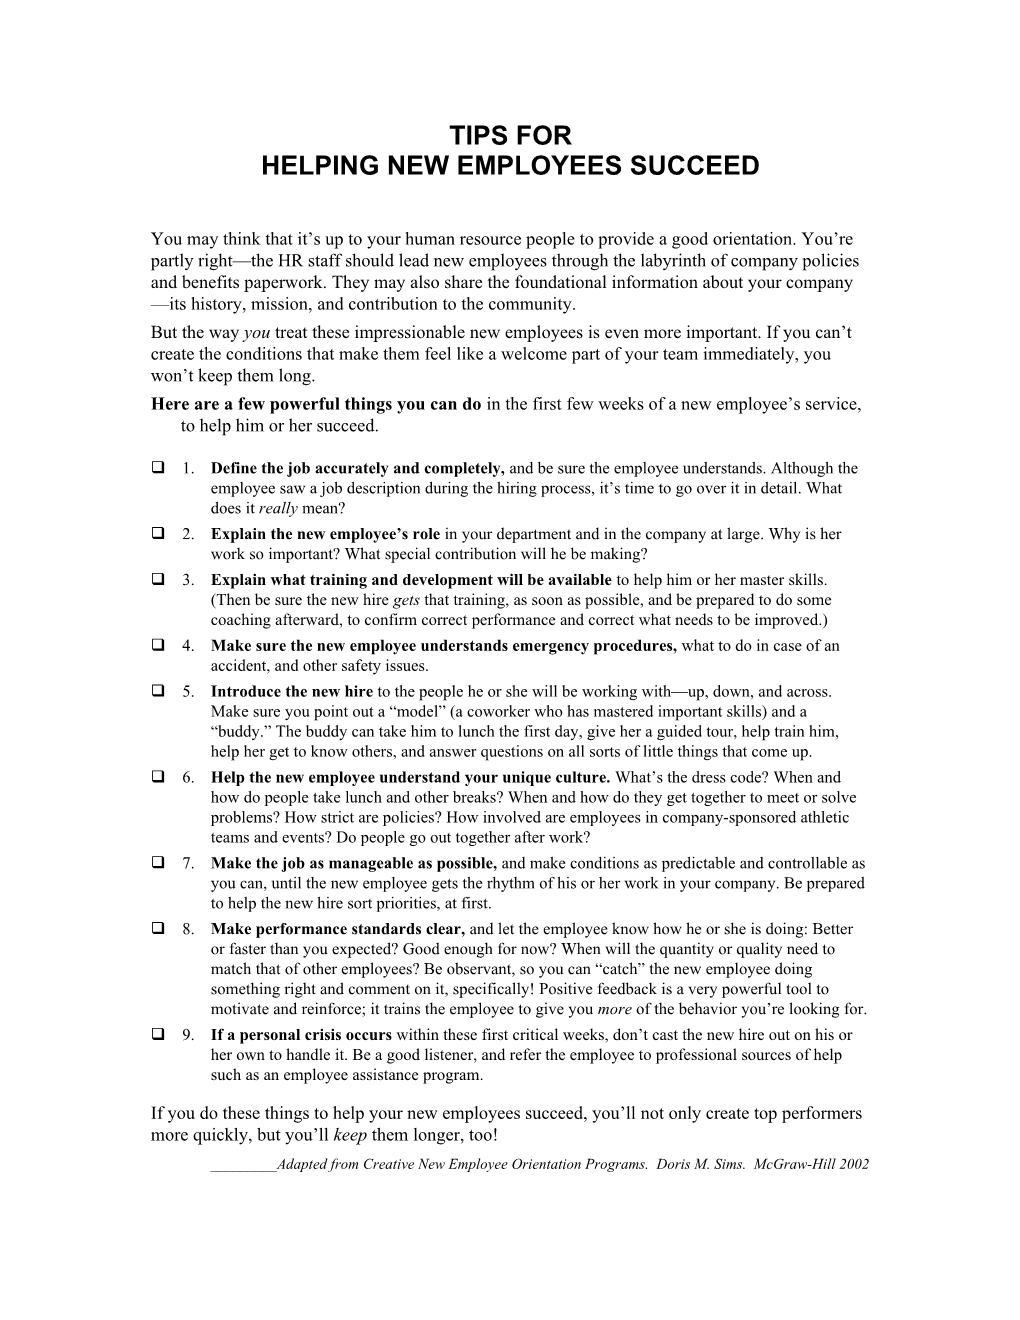 Tips for Helping New Employees Succeed